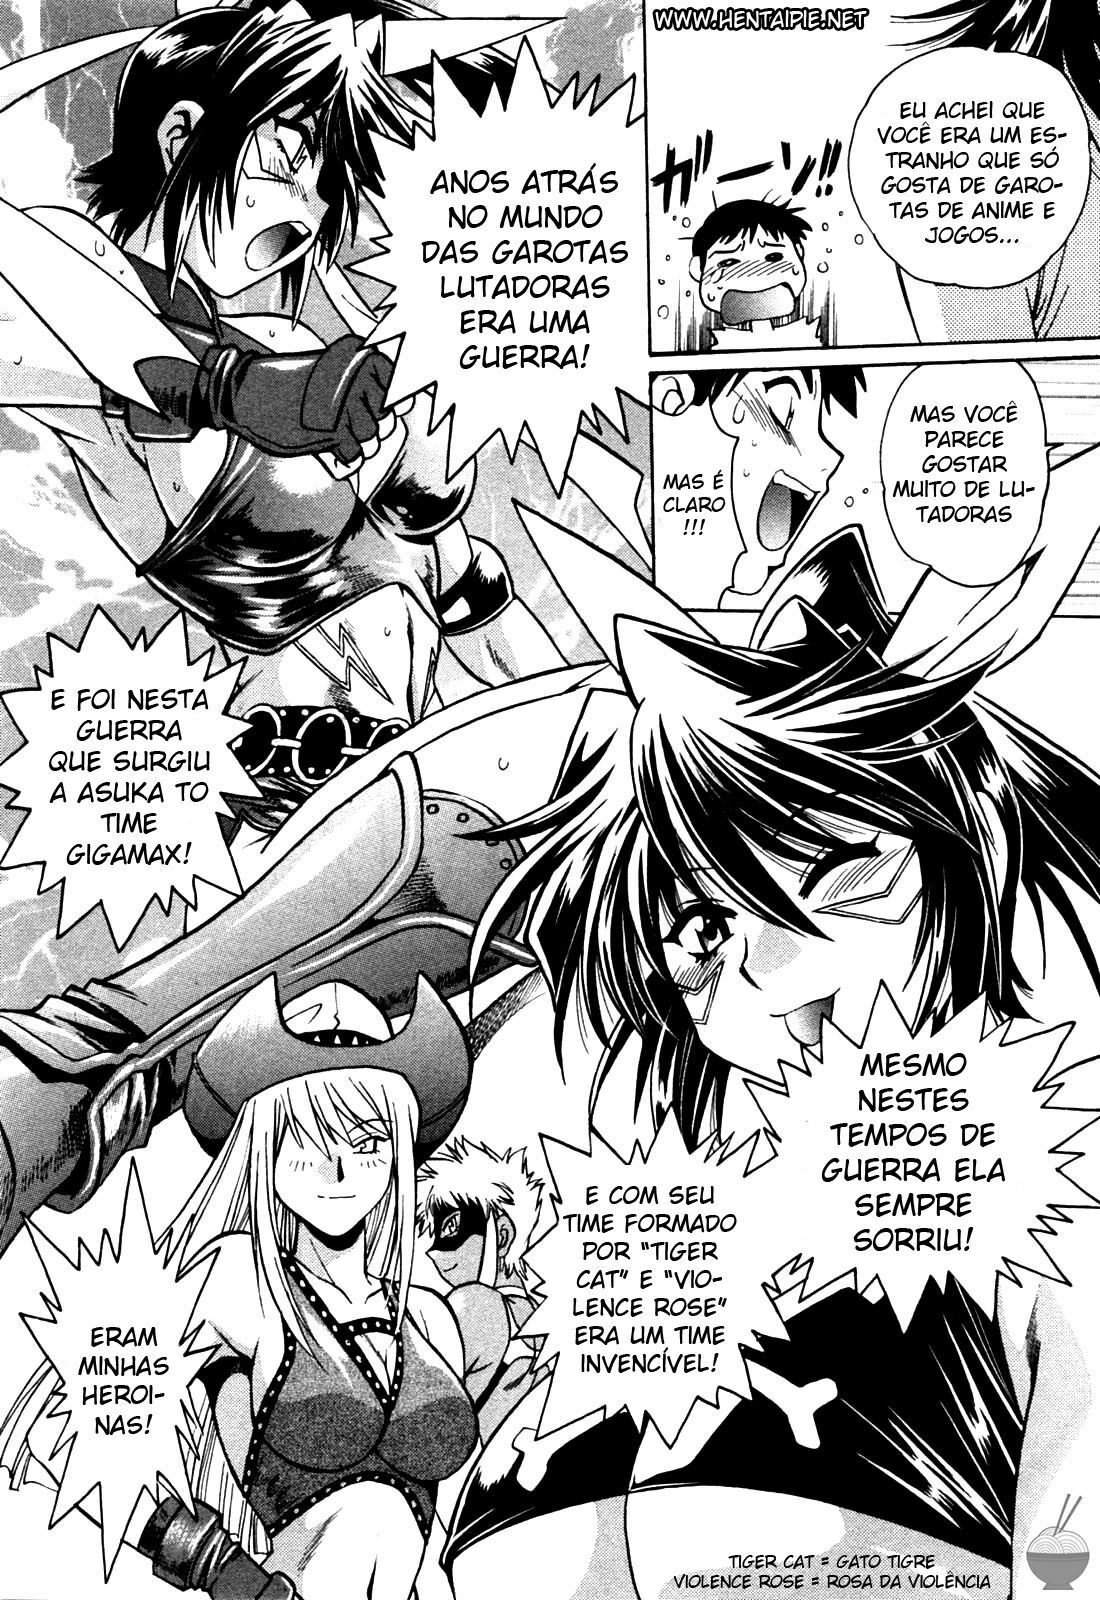 [Manabe Jouji] Ring x Mama 1 [Portuguese-BR] [HentaiPie] page 16 full